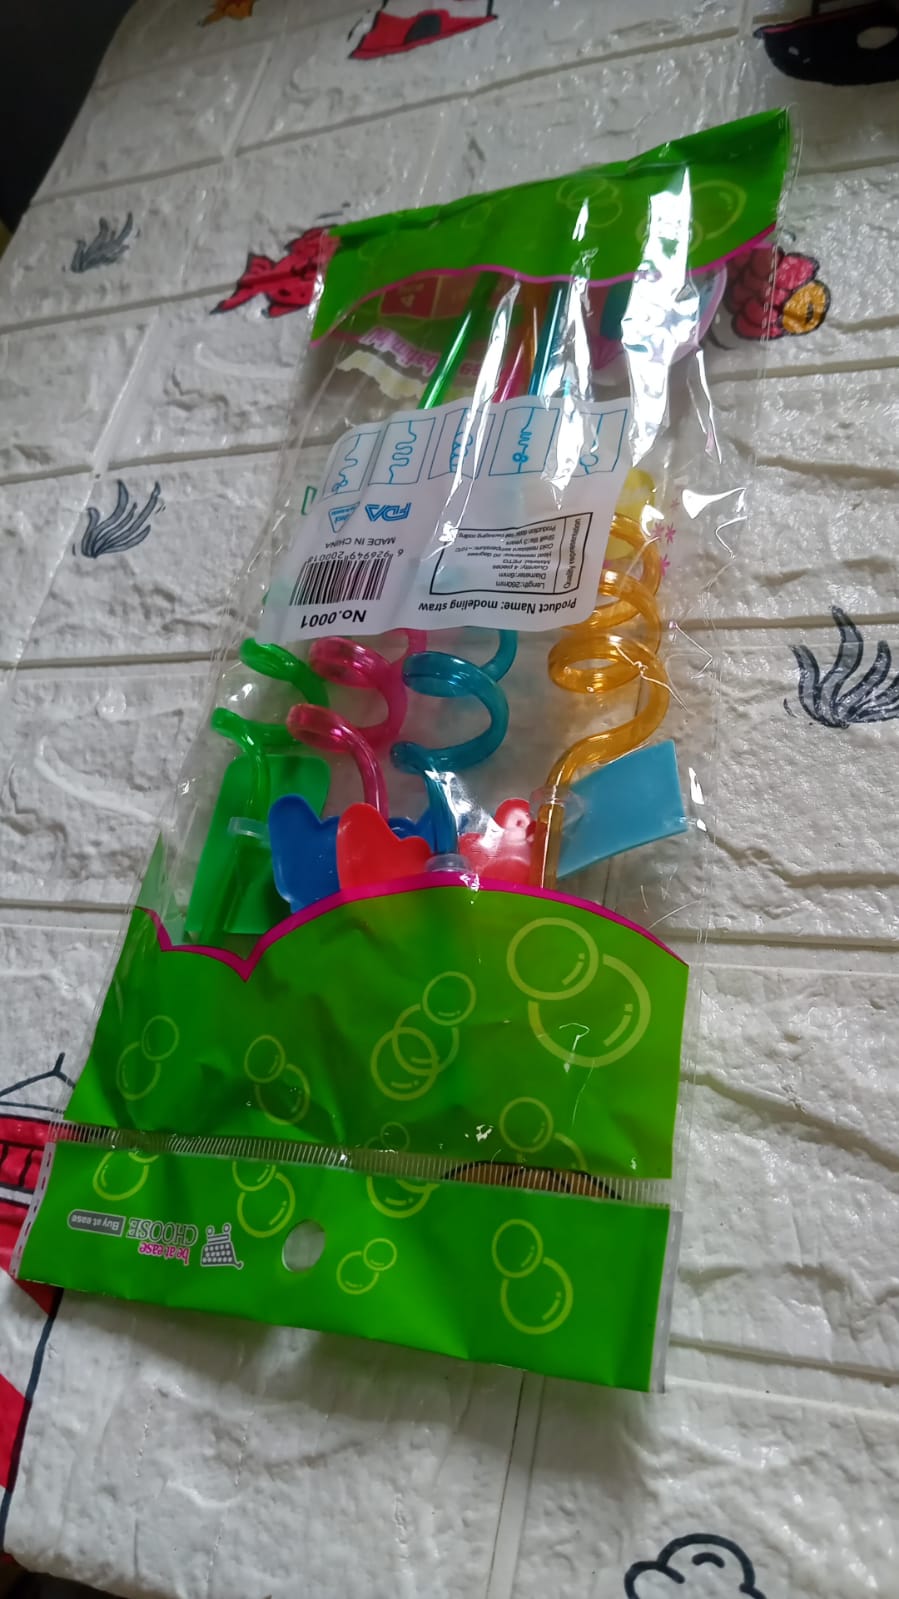 5925 Reusable straws are perfect for kids' summer parties. Plastic Straws Reusable Drinking Straws with Cartoon Decoration for Kids Birthday Party Favors or other summer celebration (4 pc Set)